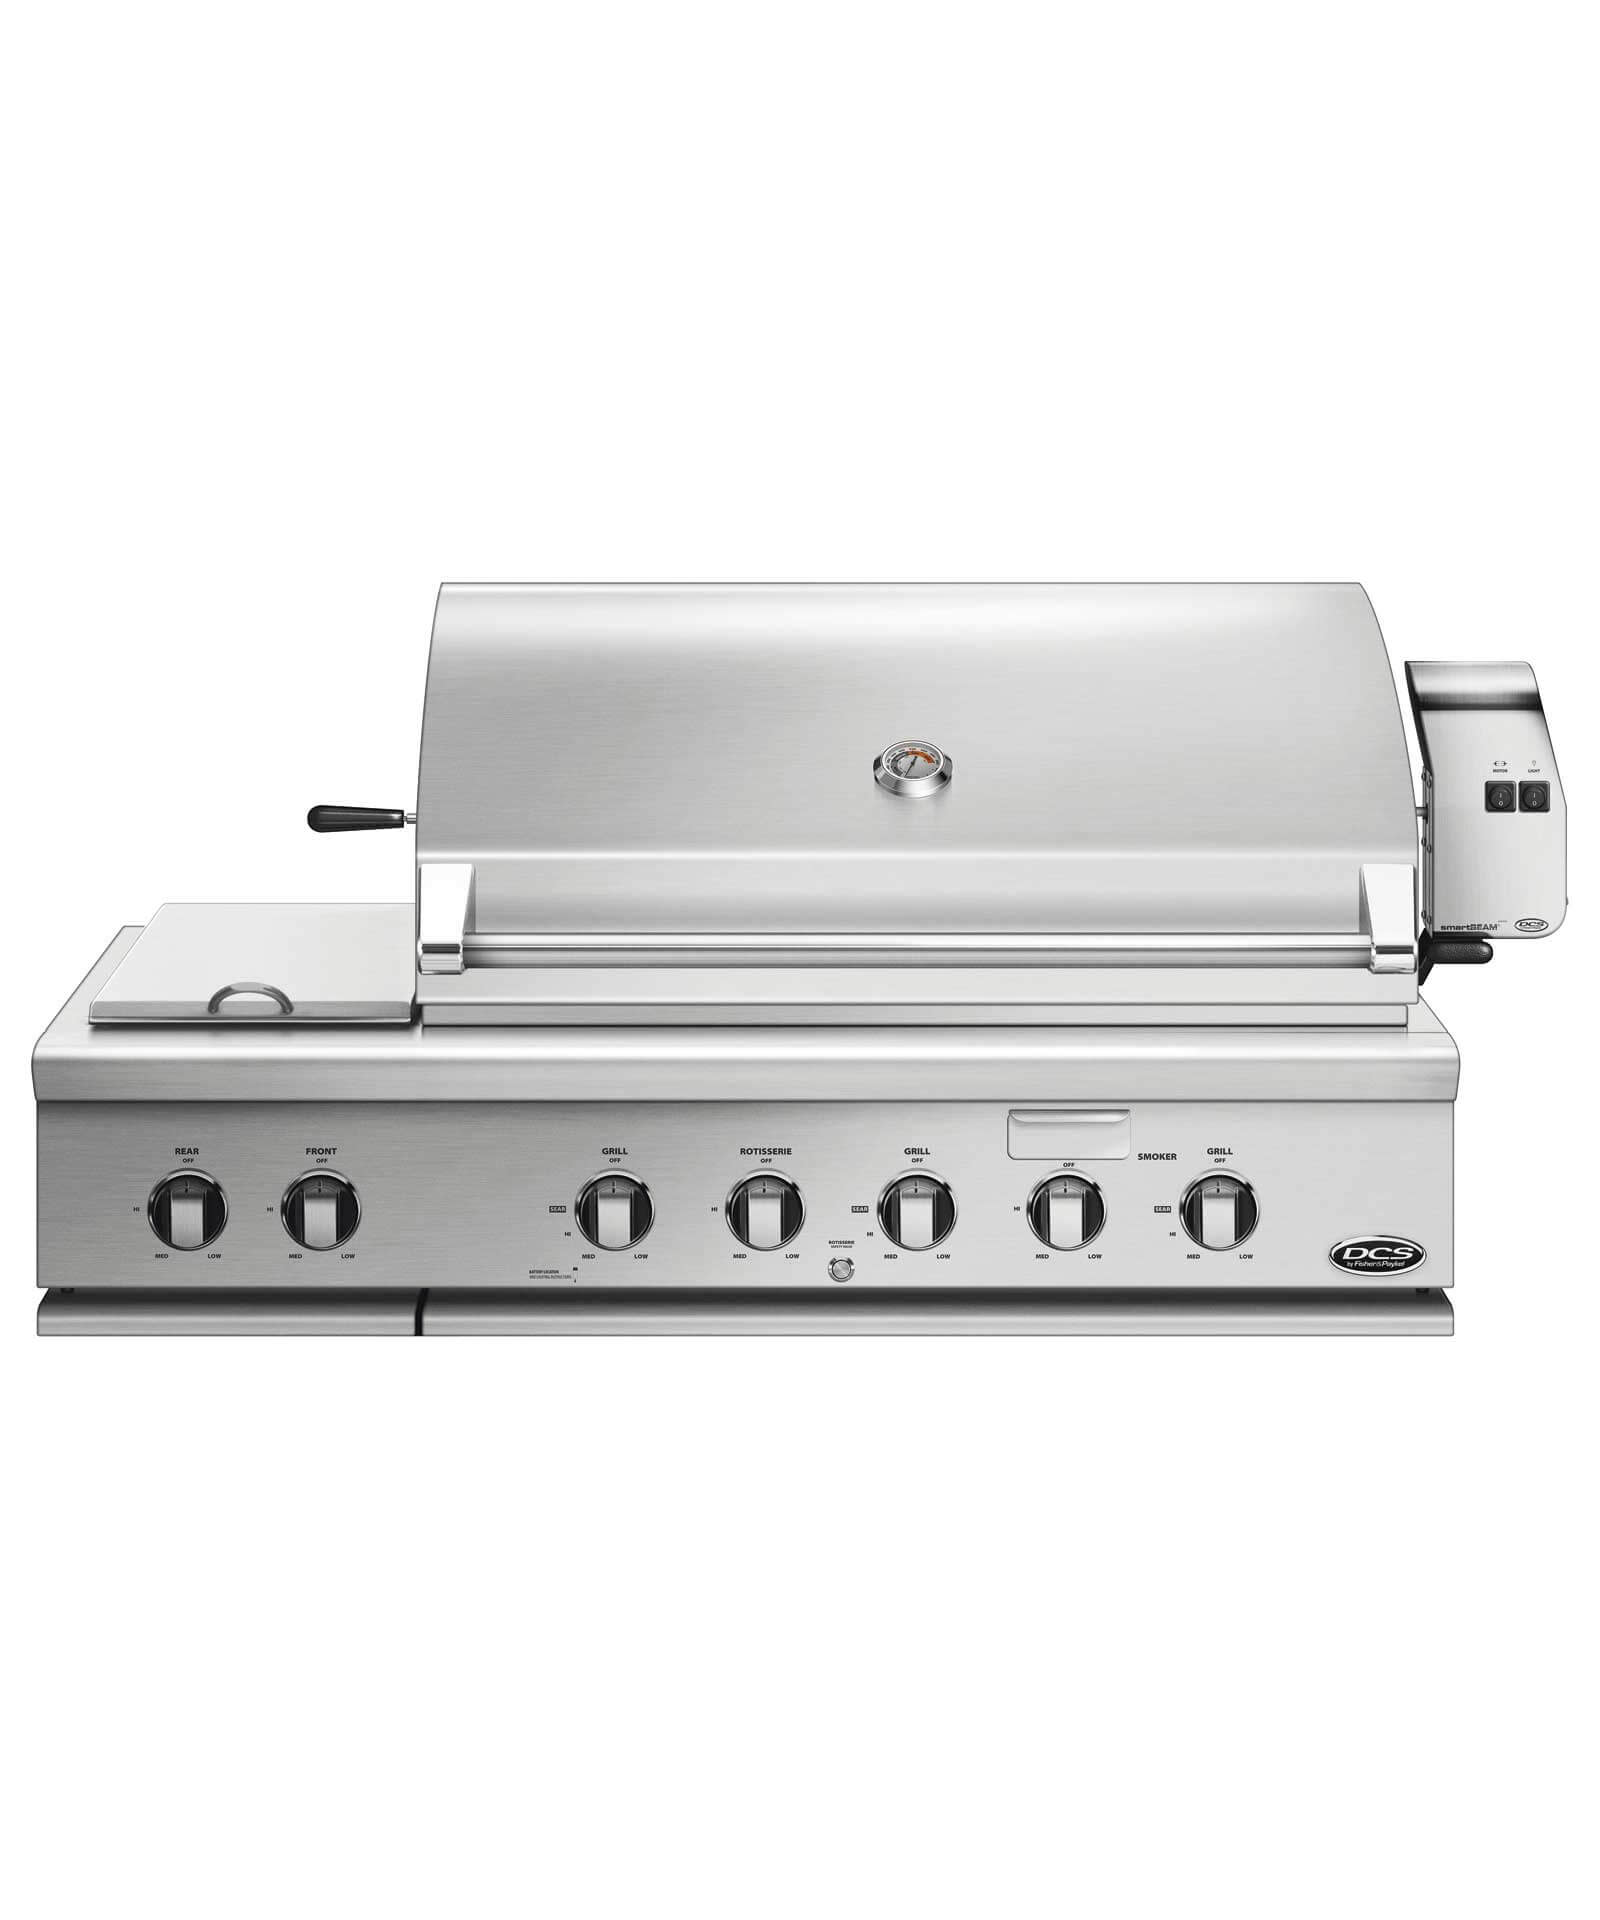 BH148RSL 48 Traditional Built-In Liquid Propane Grill with 3 Stainless Steel Burners 1 Smoker Tray Rotisserie 2 Side Burners 1115 sq. in. Cooking Surface and Drip Pan in Stainless Steel - image 1 of 2